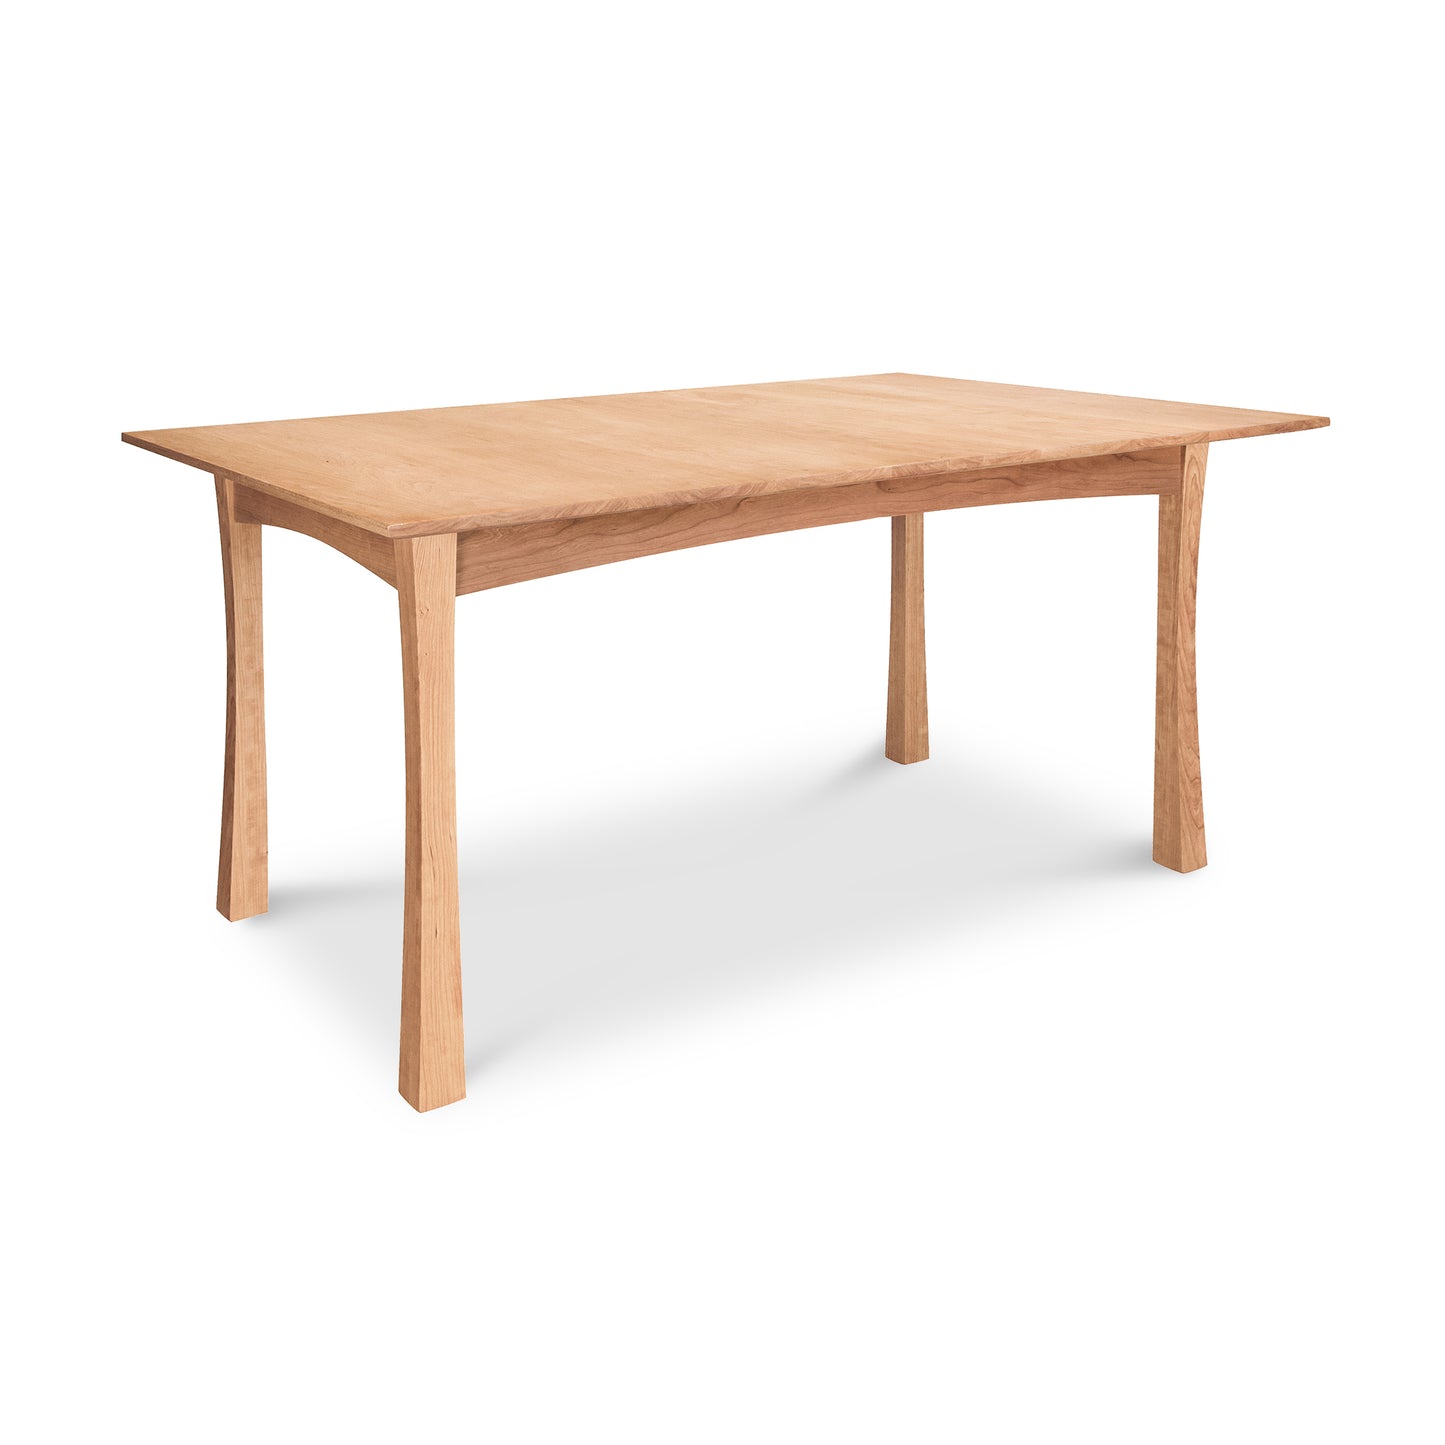 A Contemporary Craftsman Solid Top Dining Table with four legs, custom-built by Vermont Furniture Designs woodworkers, isolated on a white background.